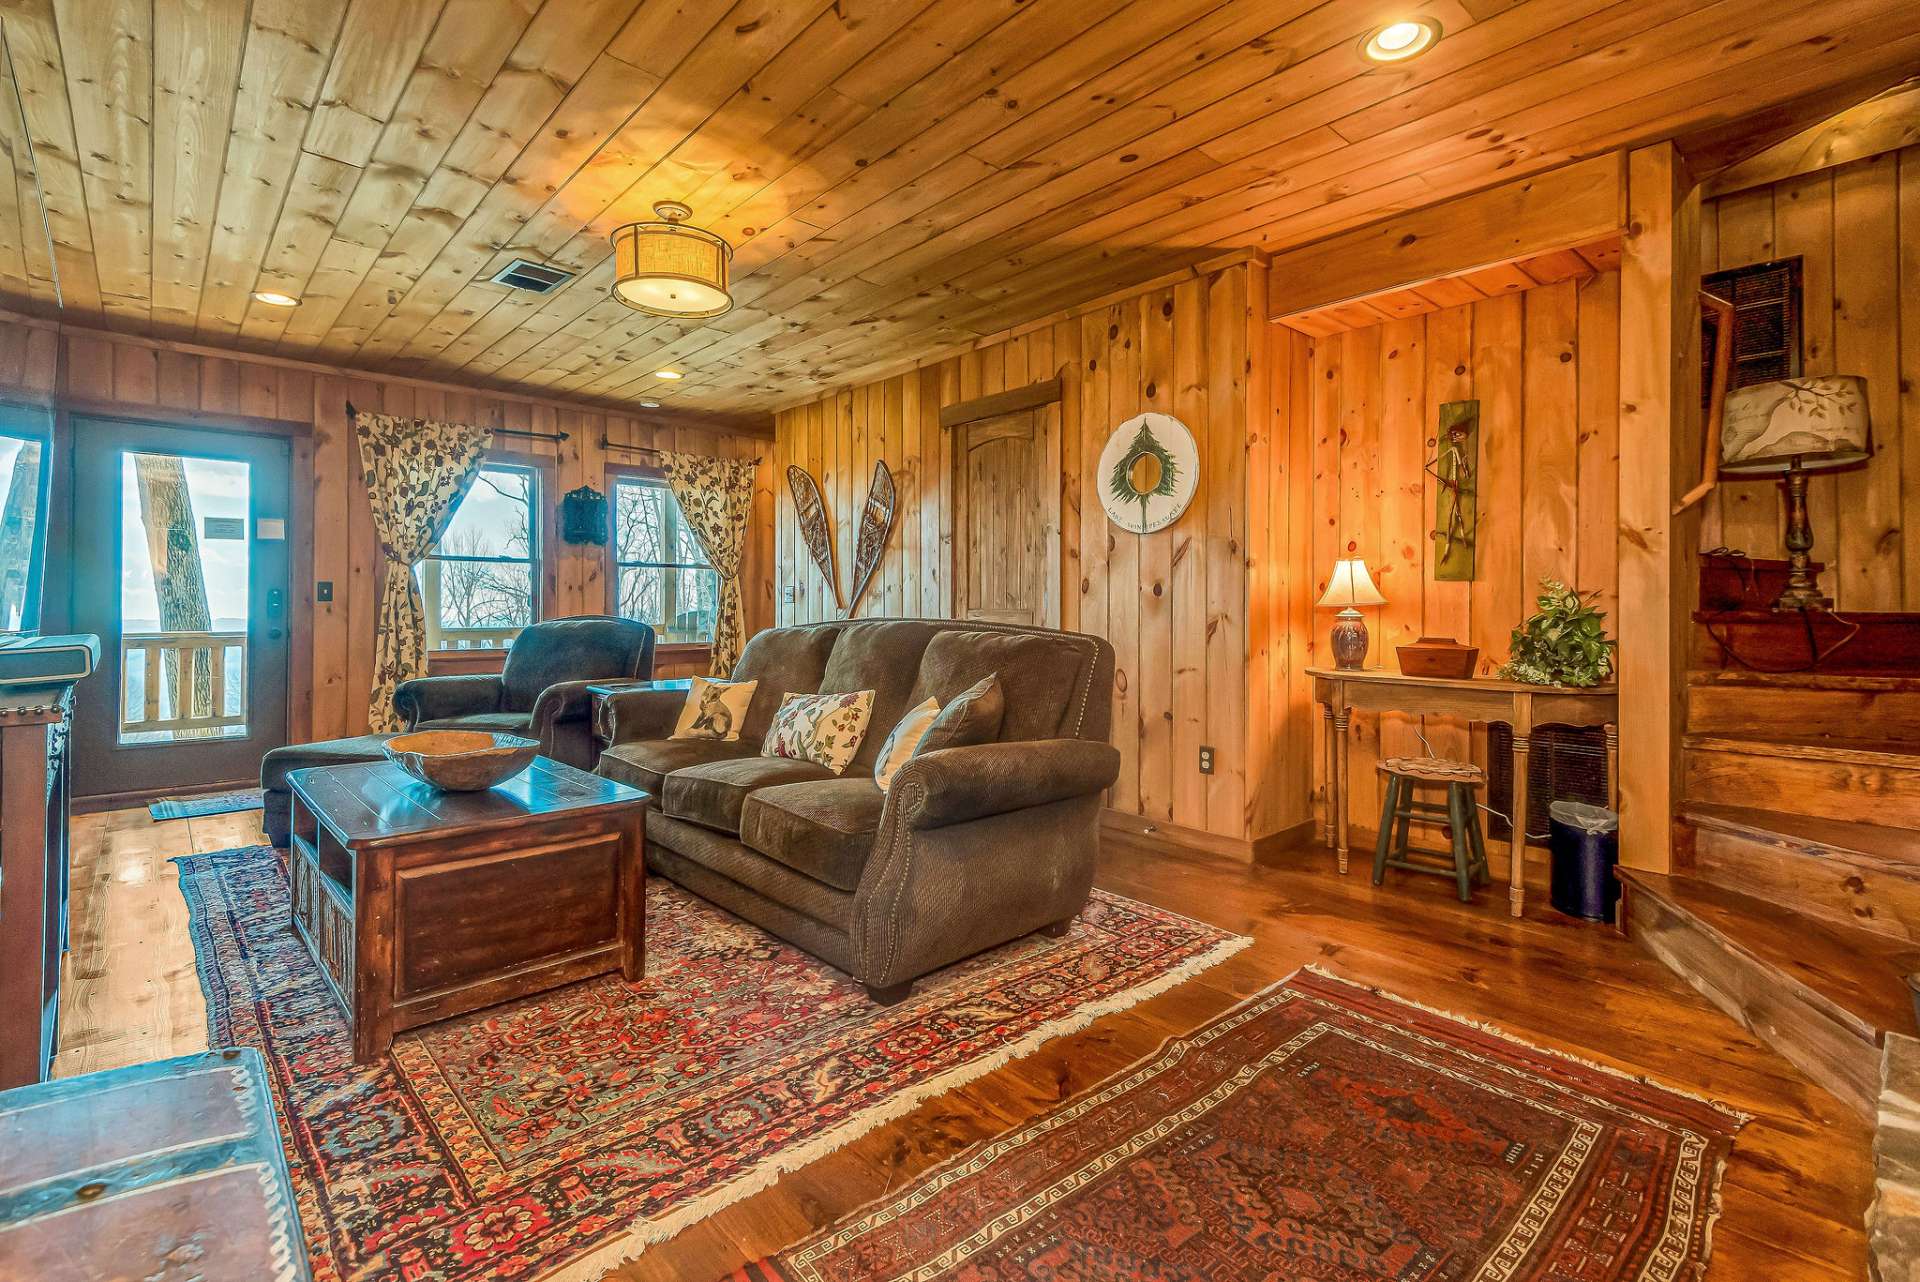 The lower level creates a cozy family room and peaceful haven for your guests with convenient access to the lower deck.